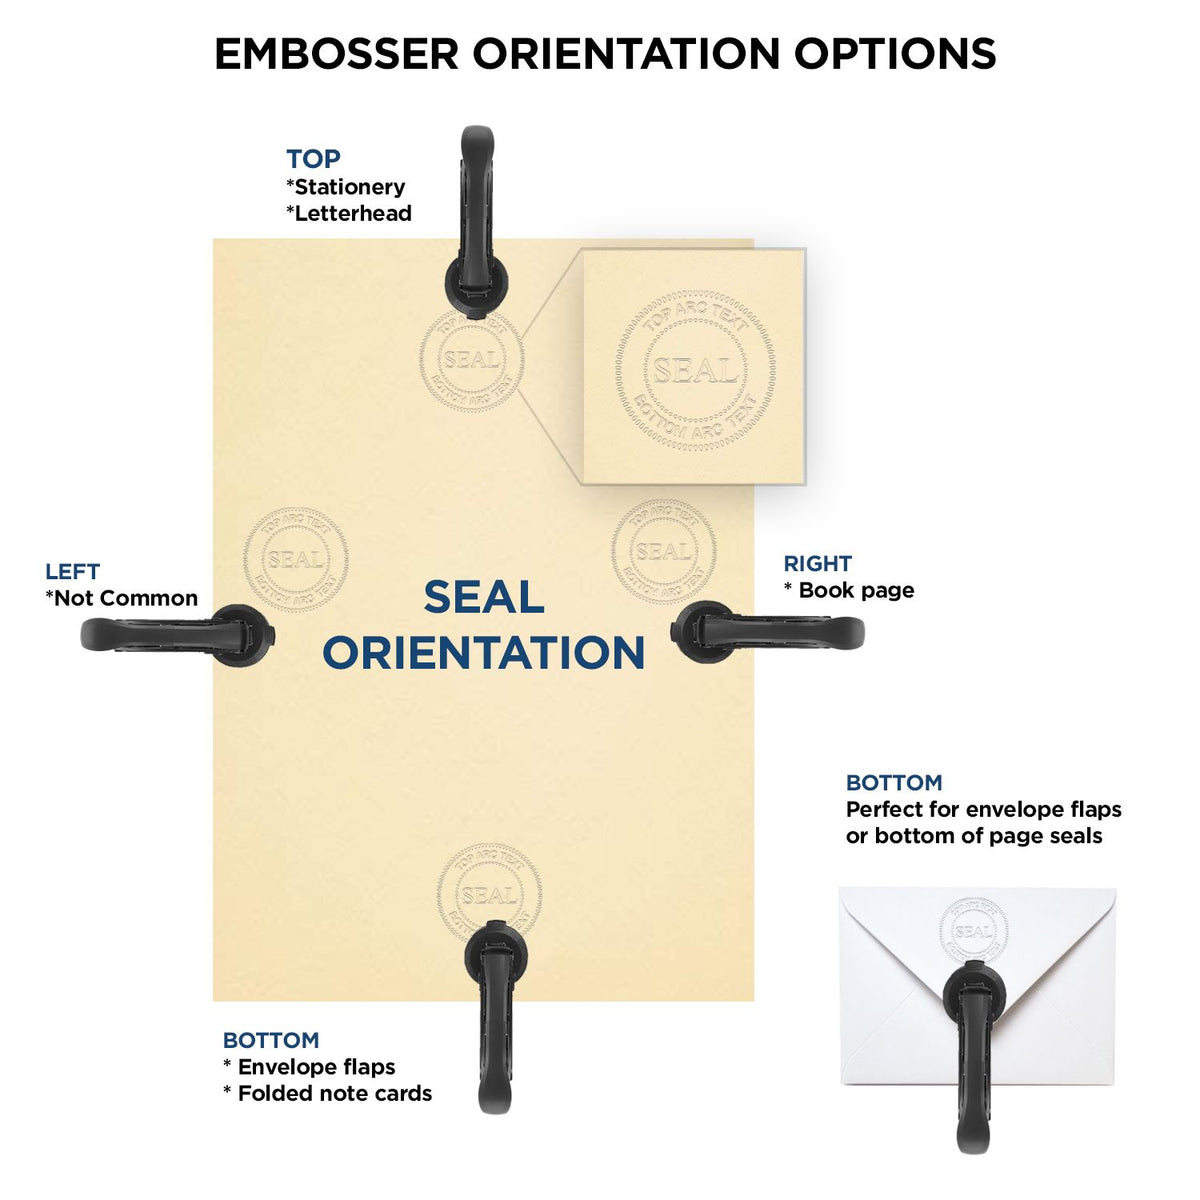 An infographic for the Heavy Duty Cast Iron Illinois Architect Embosser showing embosser orientation, this is showing examples of a top, bottom, right and left insert.